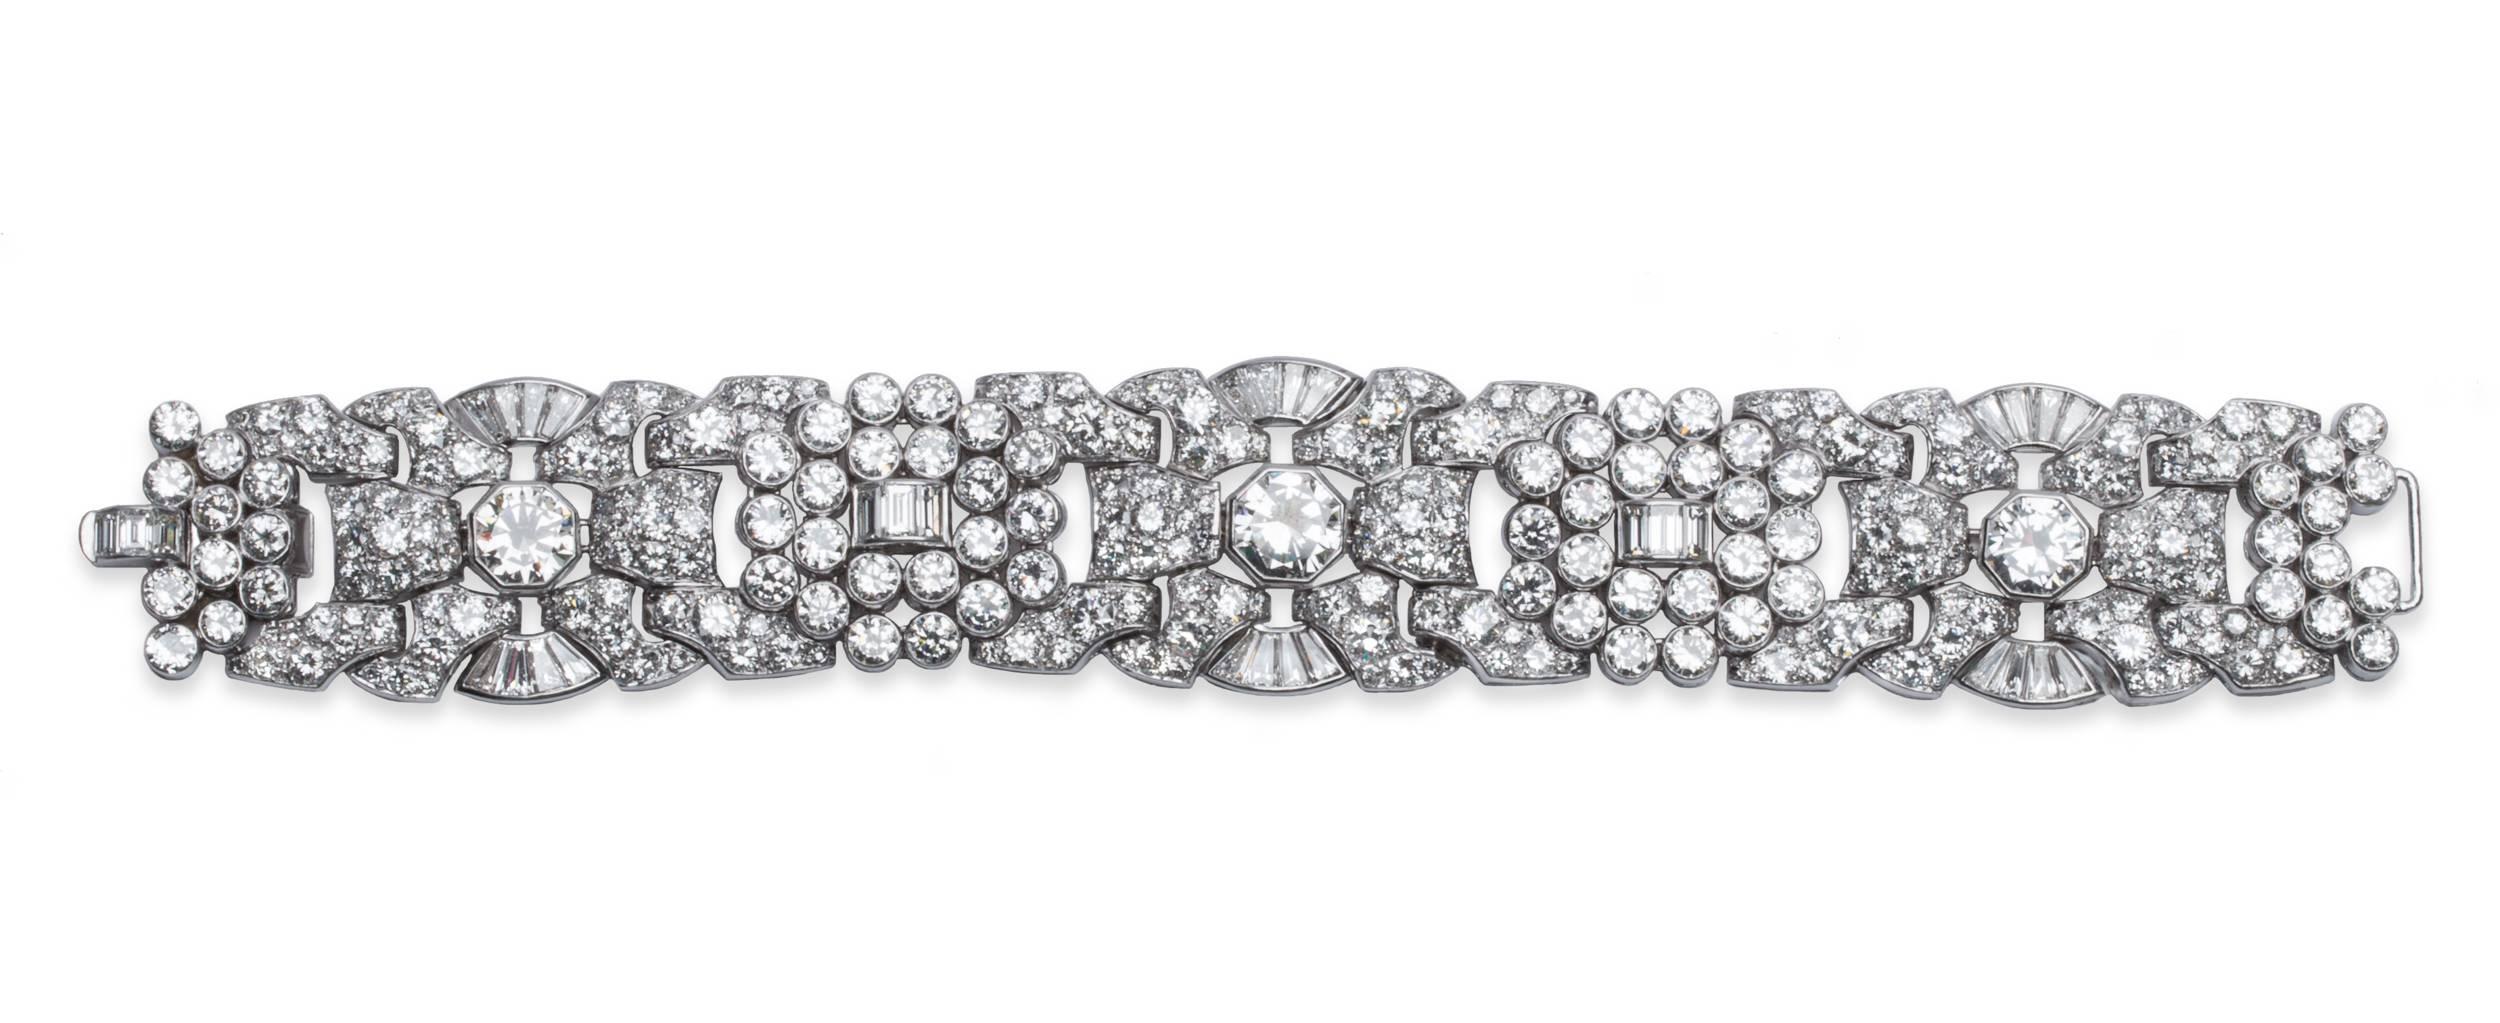 Art Deco Diamond and Platinum Bracelet. The bracelet has French assay hallmarks for platinum, 50.00 carat total diamond weight, it is 7 inches long and 1 inch wide.
